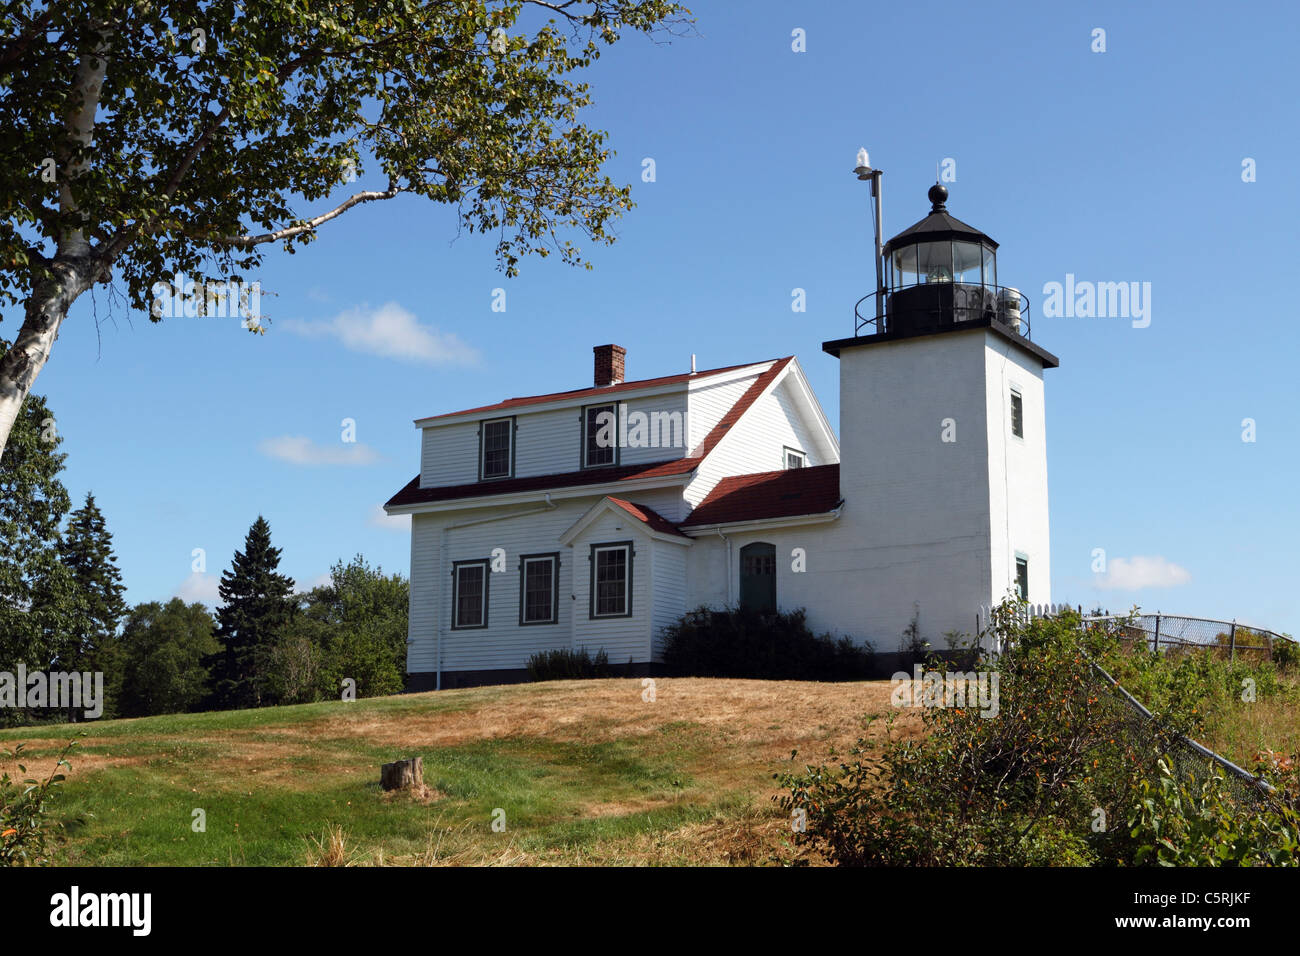 Fort Point Lighthouse in Fort Point Light State Park, Maine, USA. The lighthouse is on Penobscot Bay. Stock Photo